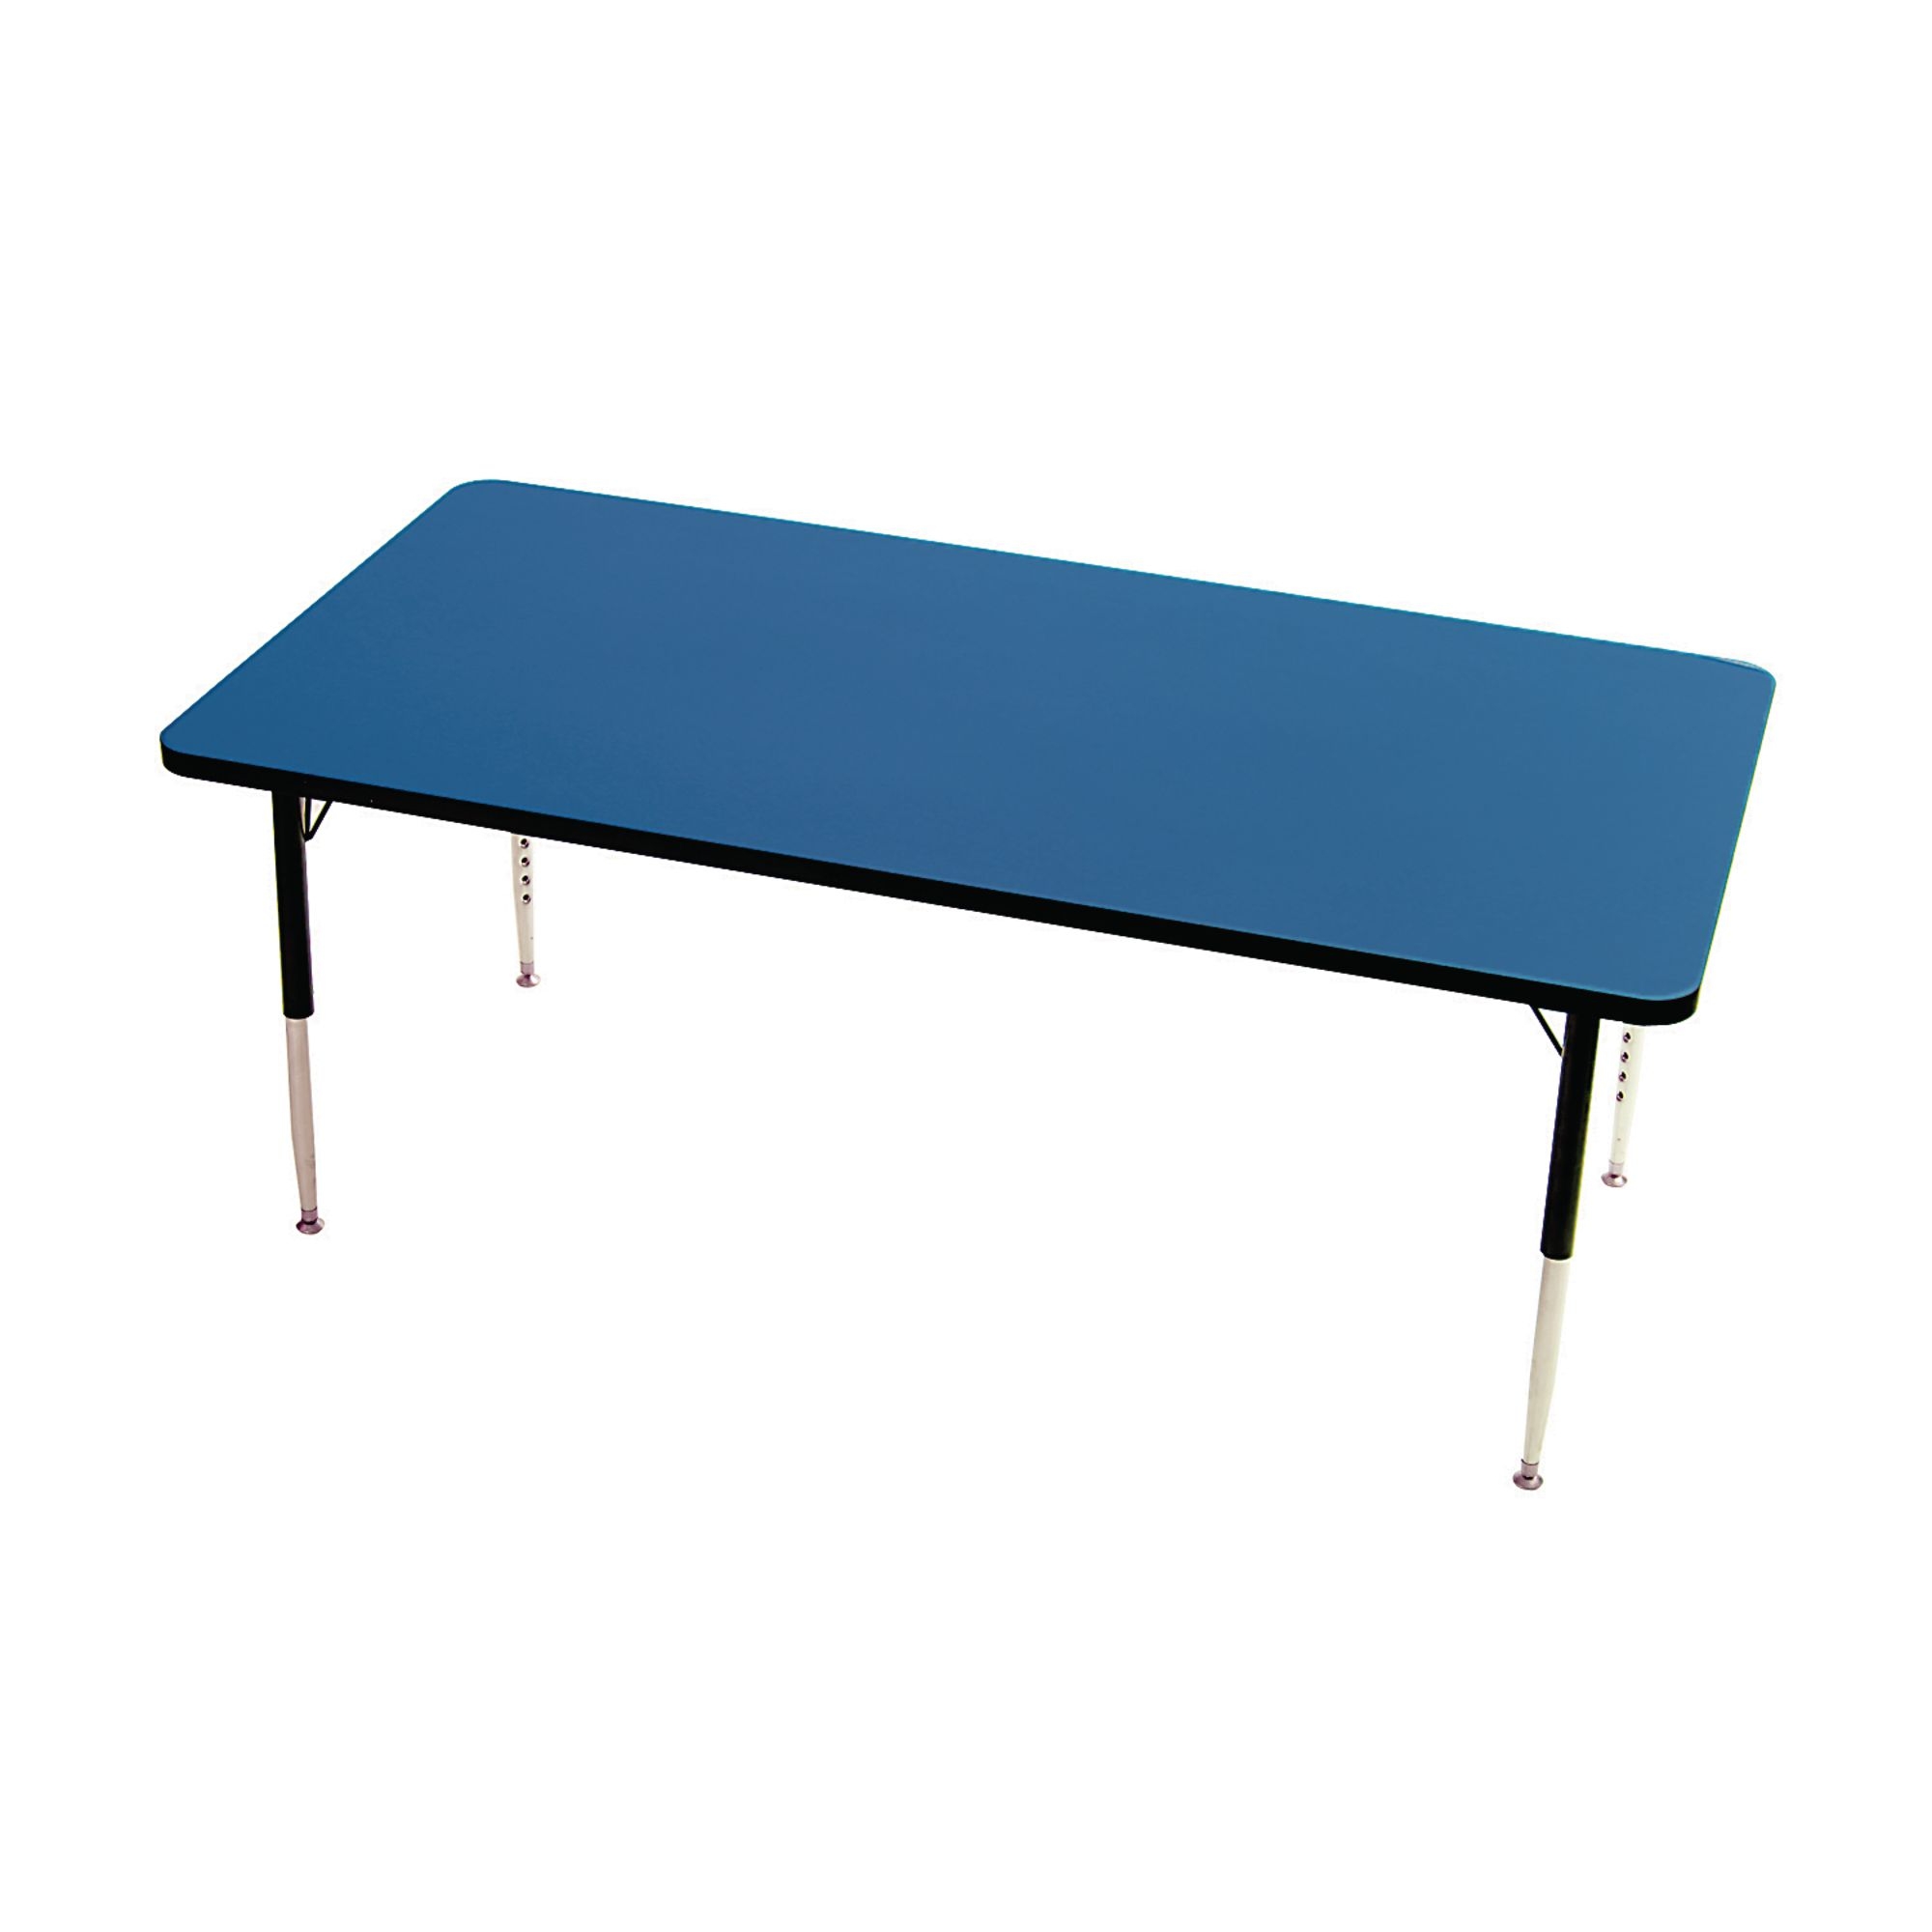 Tuf-Top Rectangular Height Adjustable Classroom Table - 1500 x 750 x 430 to 635mm - Blue